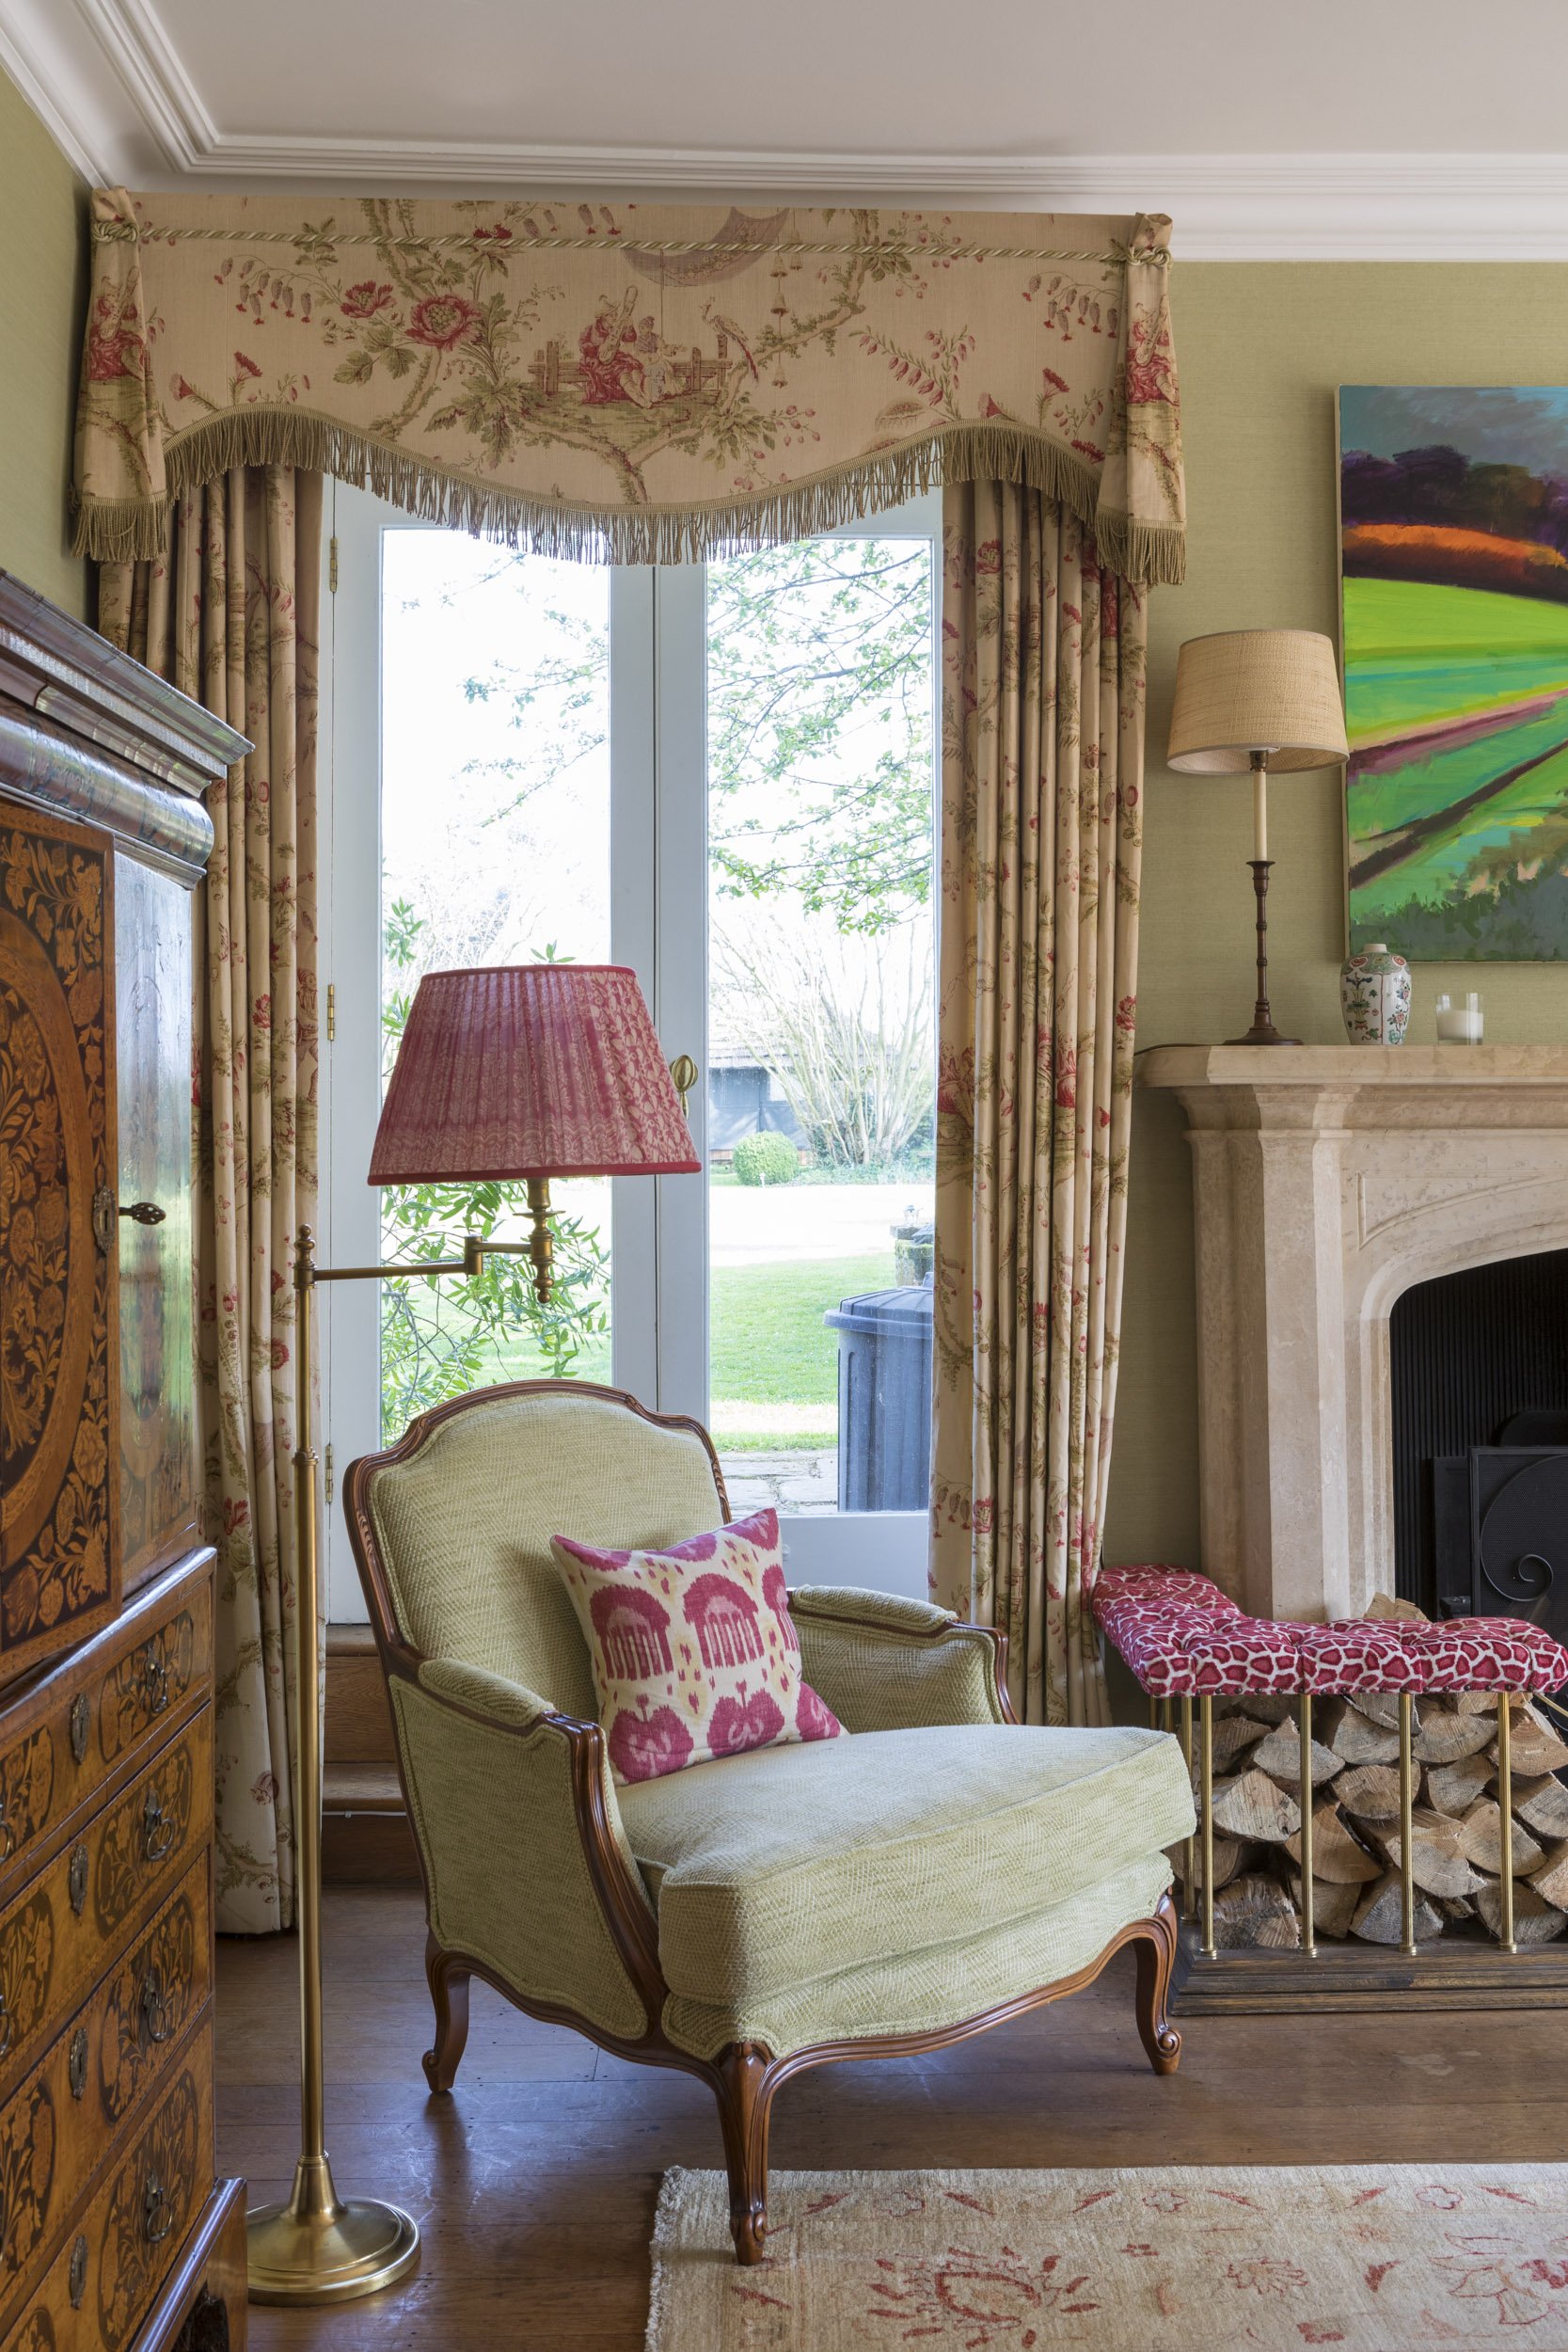 Interior photography for Kelling Designs, Norfolk